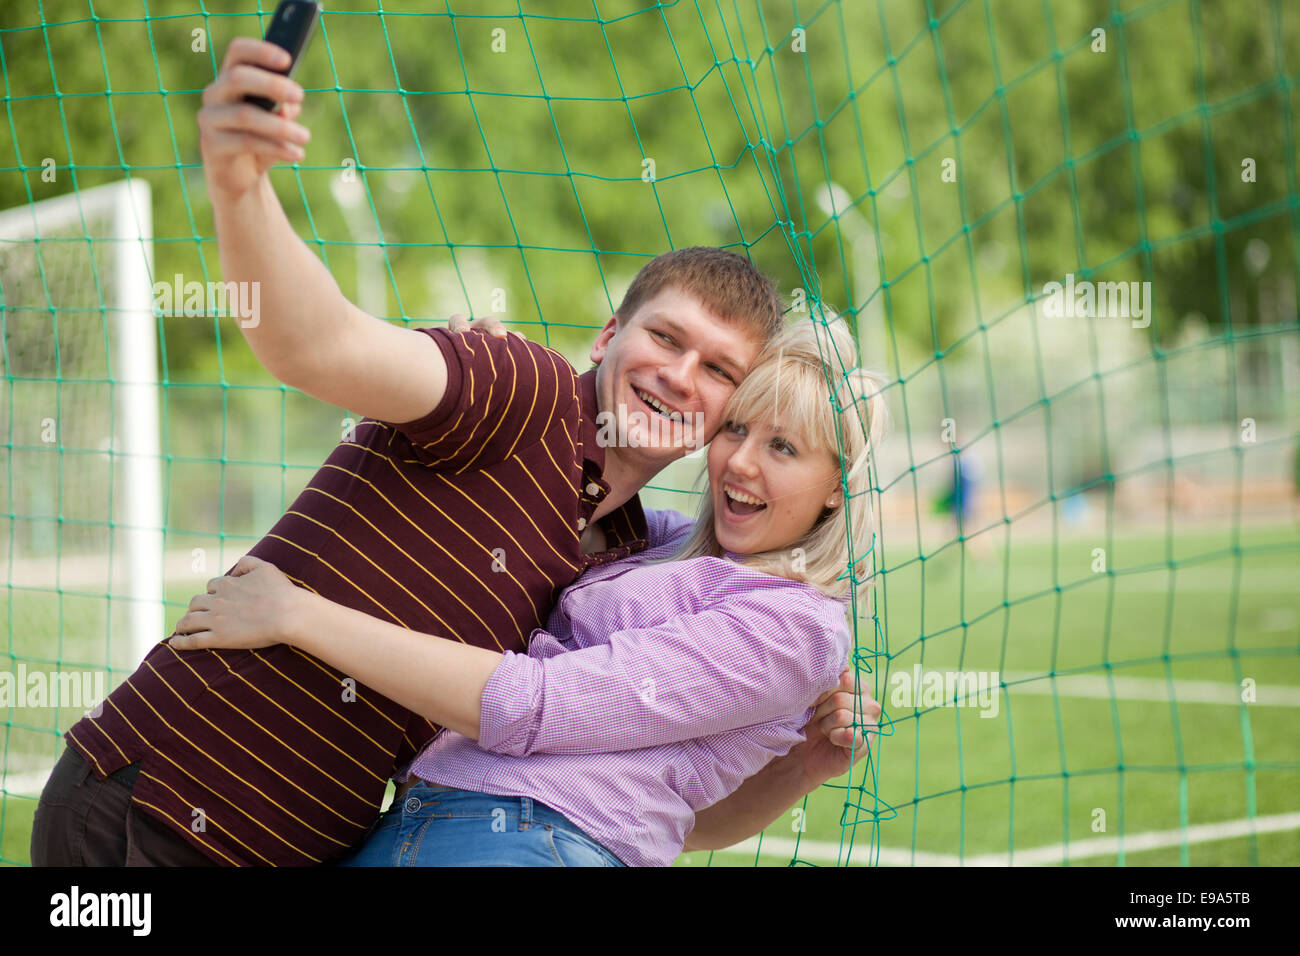 boy and girl photographed themselves Stock Photo